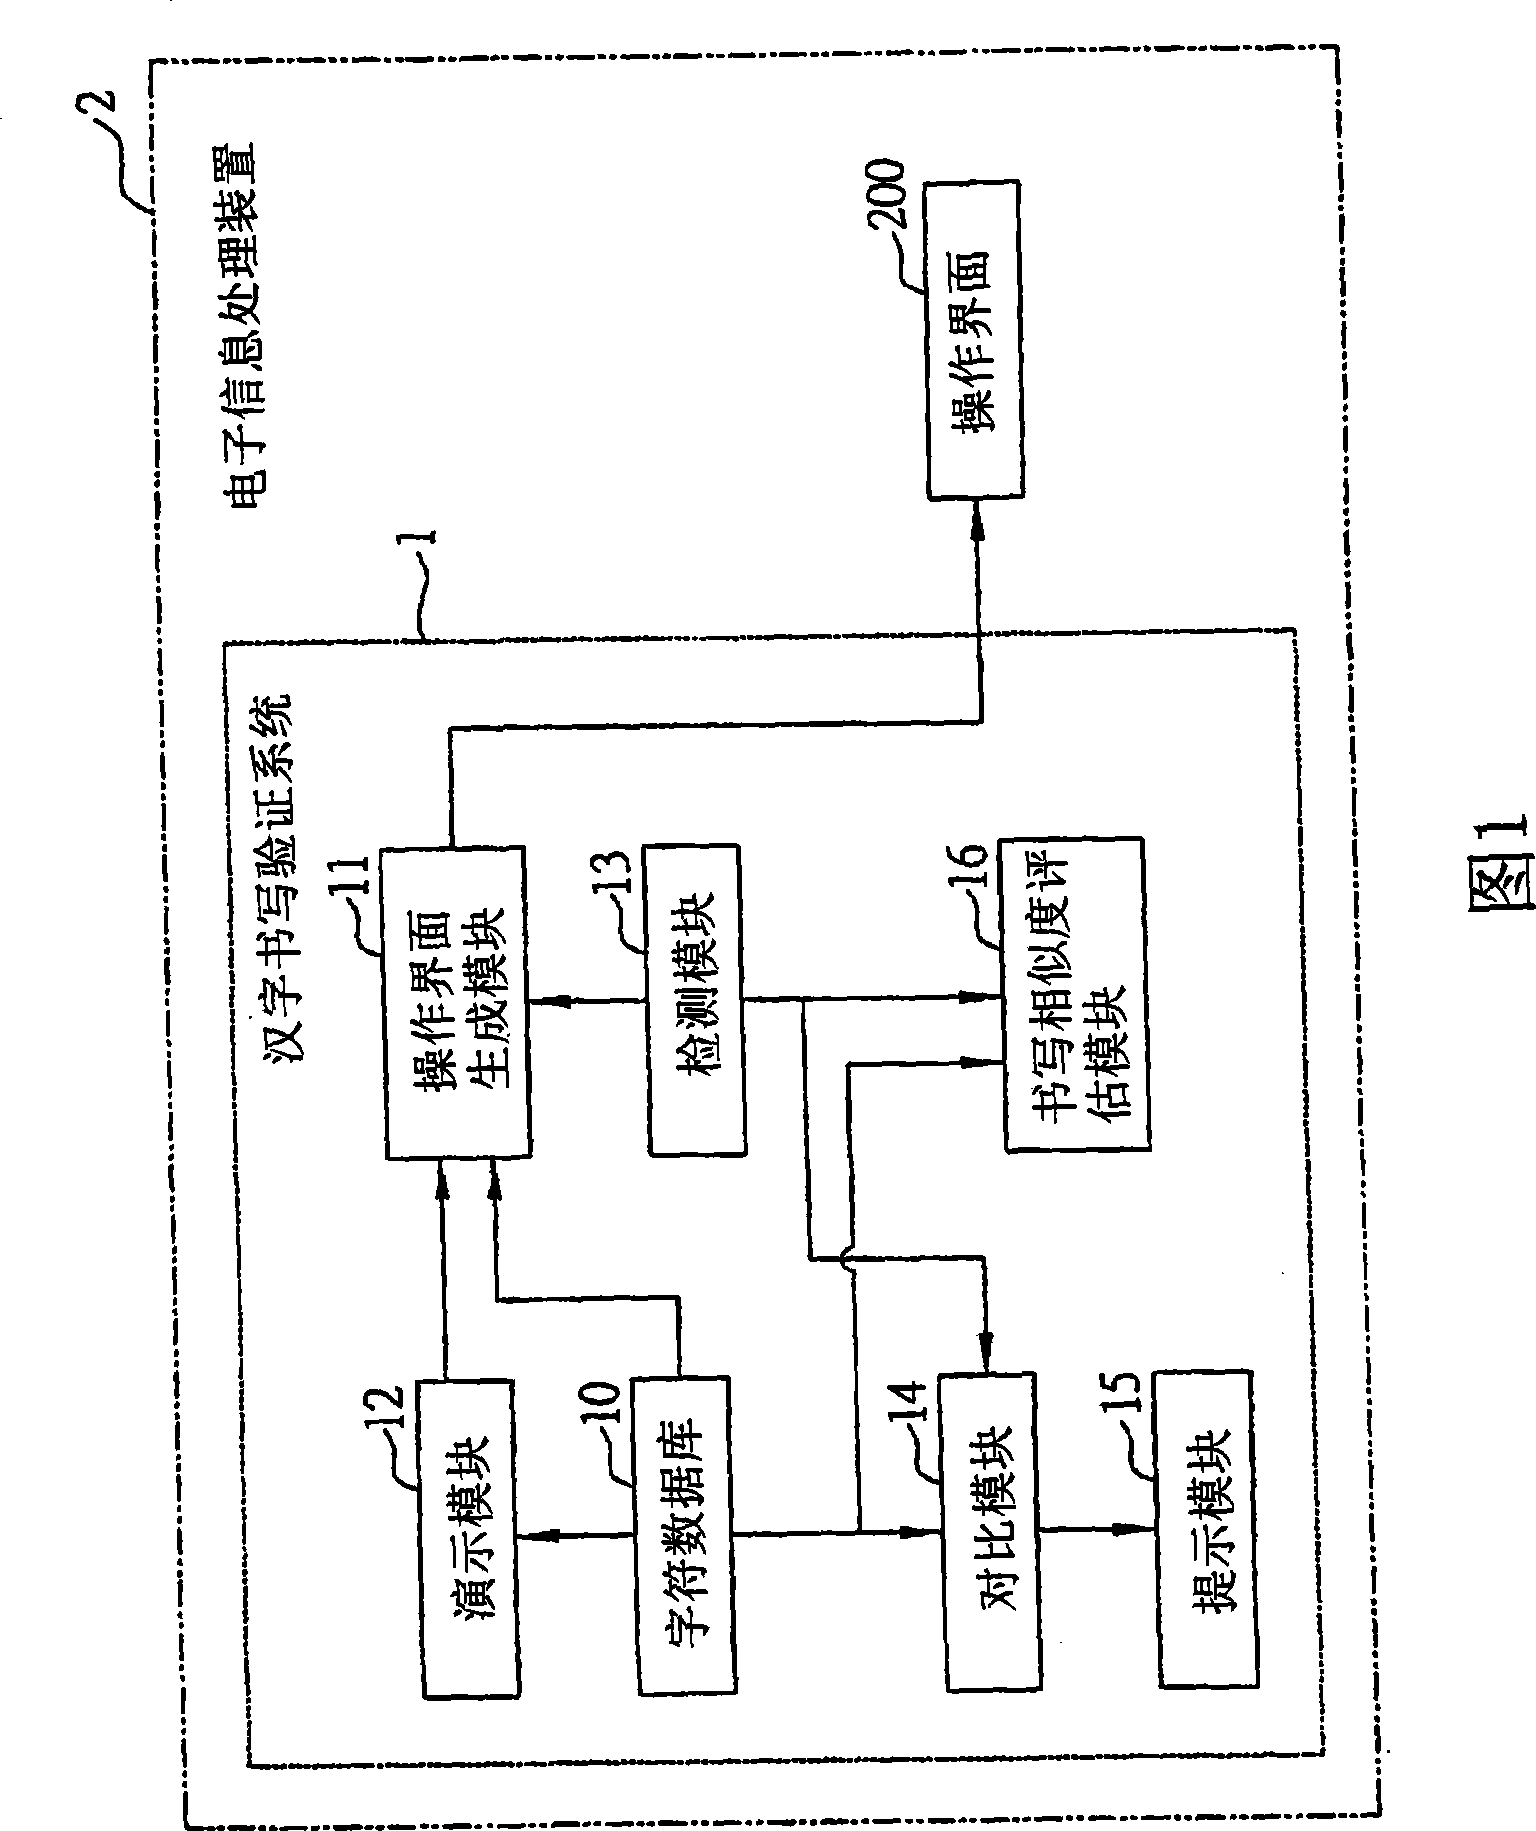 Chinese character writing validation system and method